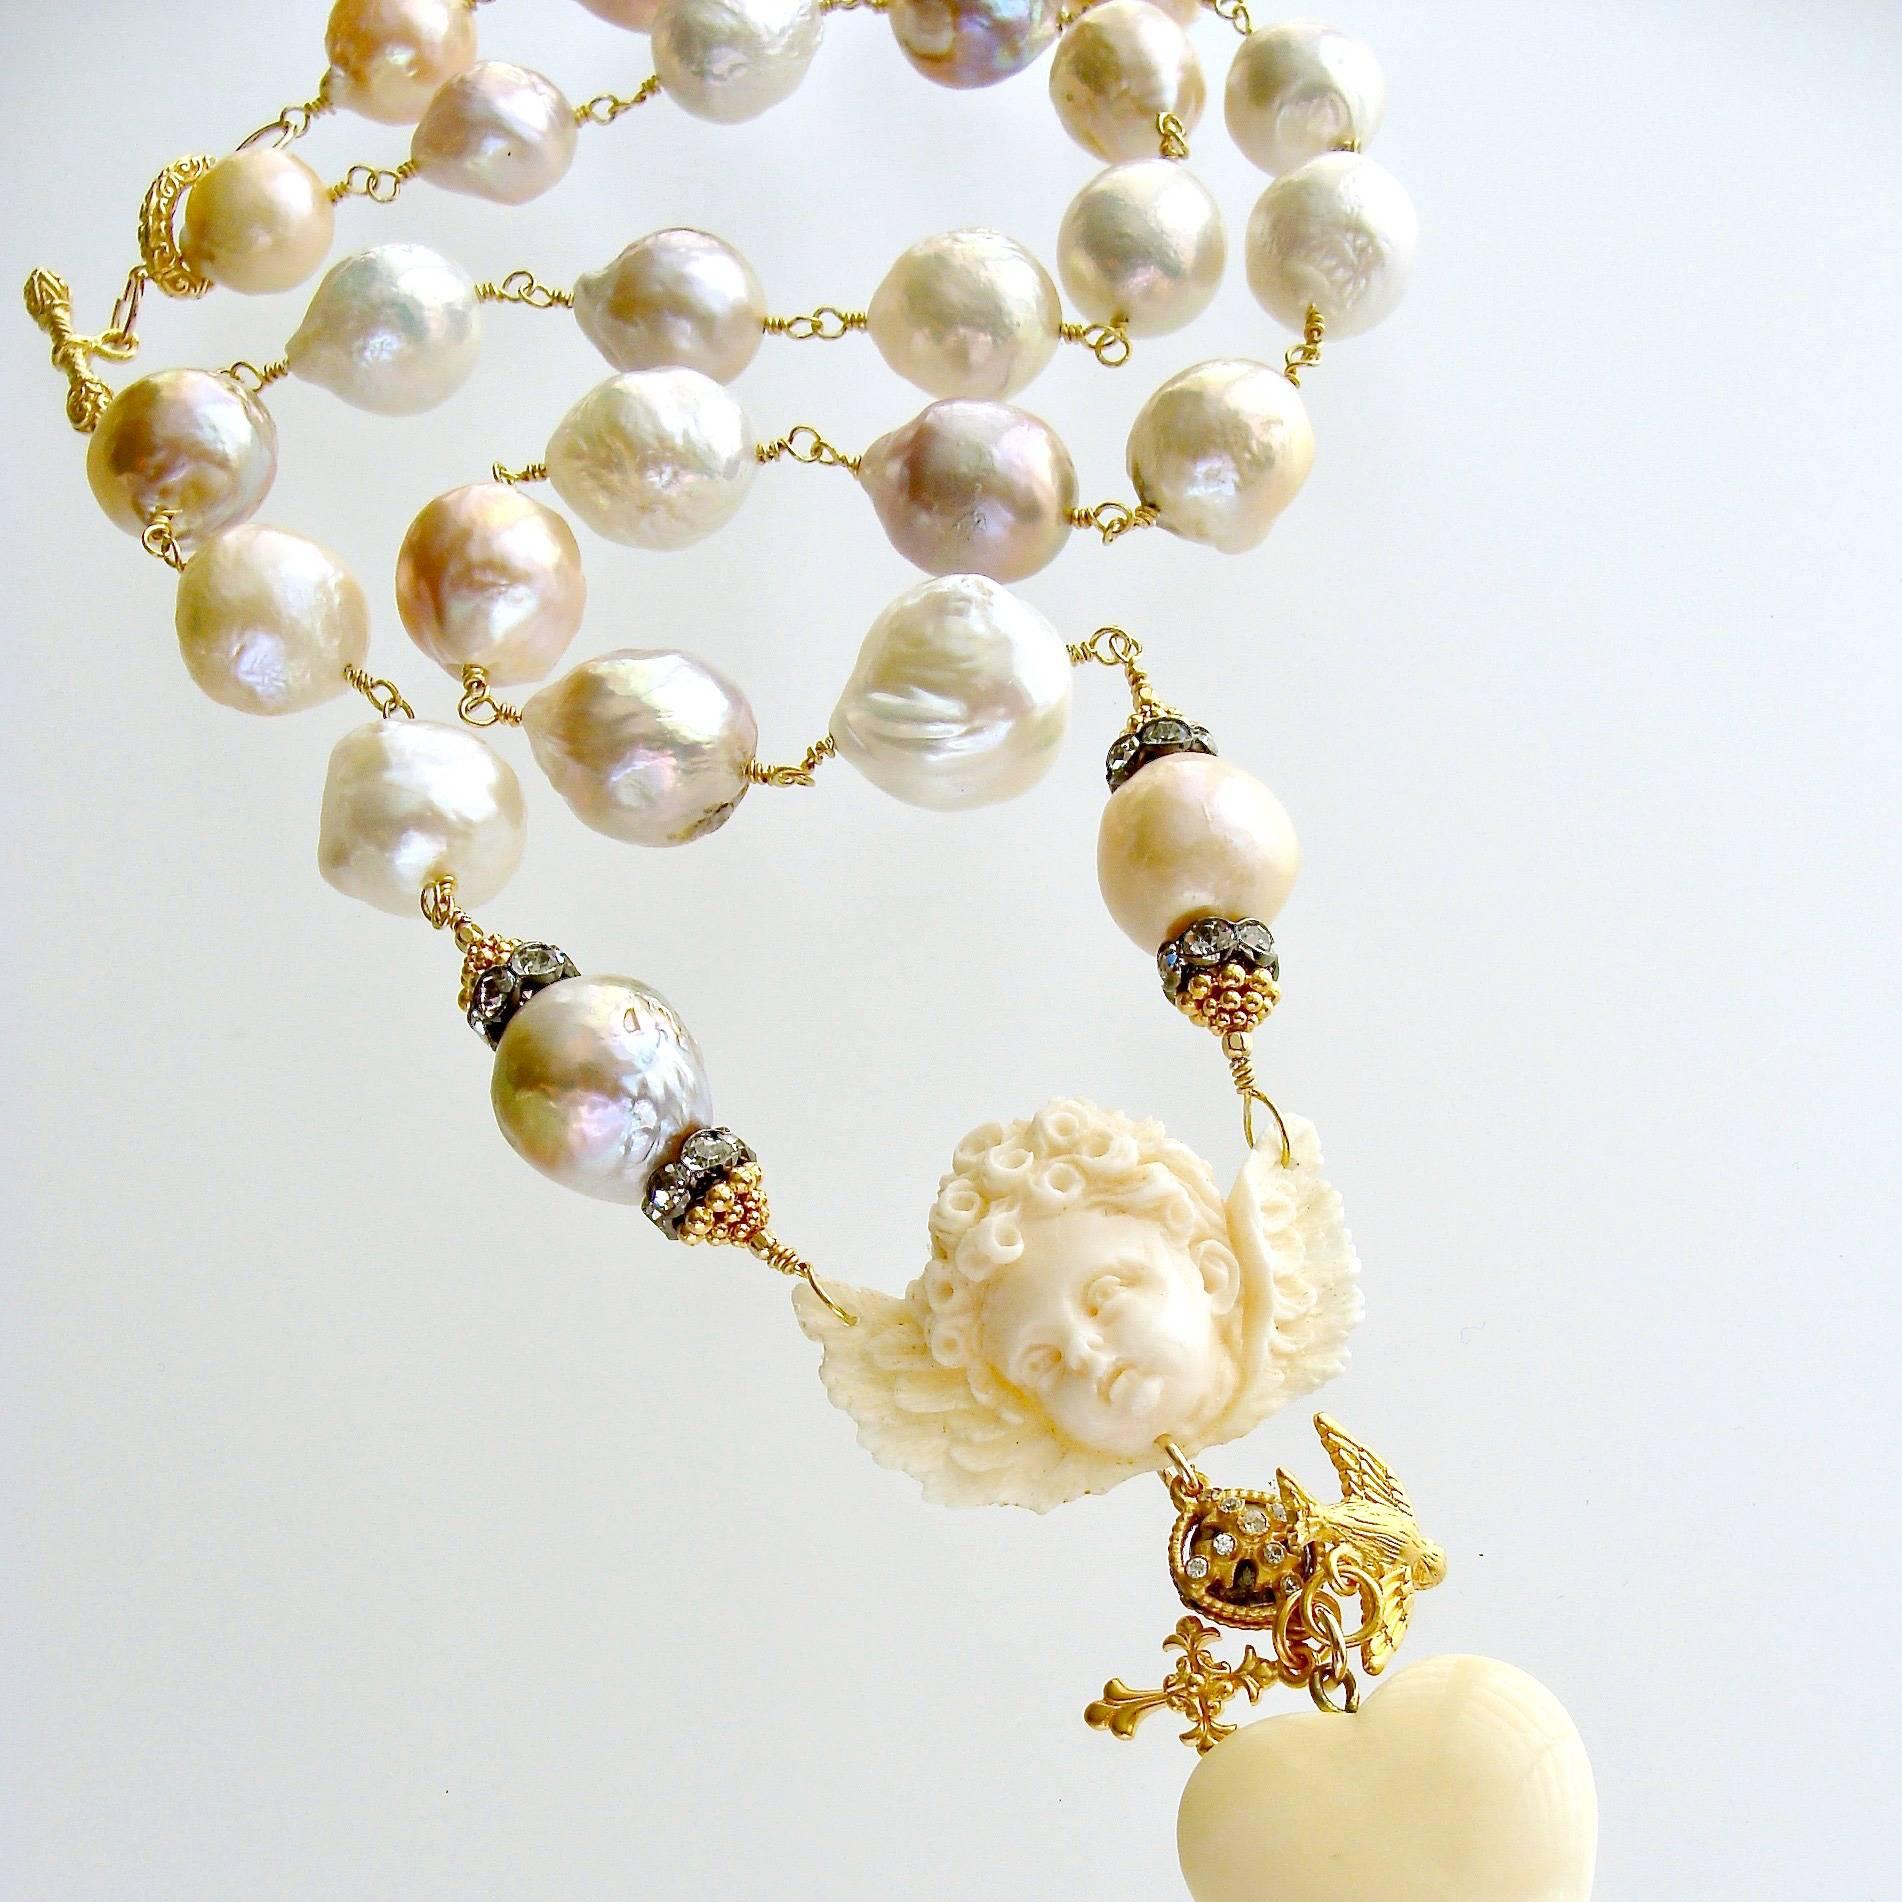 Mon Ange Chéri Necklace.

A silky smooth large graduated strand of multi-colored pink, peach, white, mauve and taupe baroque pearls - is the dreamy basis of this heavenly necklace design.  These naturally colored craggy baroque pearls are hand